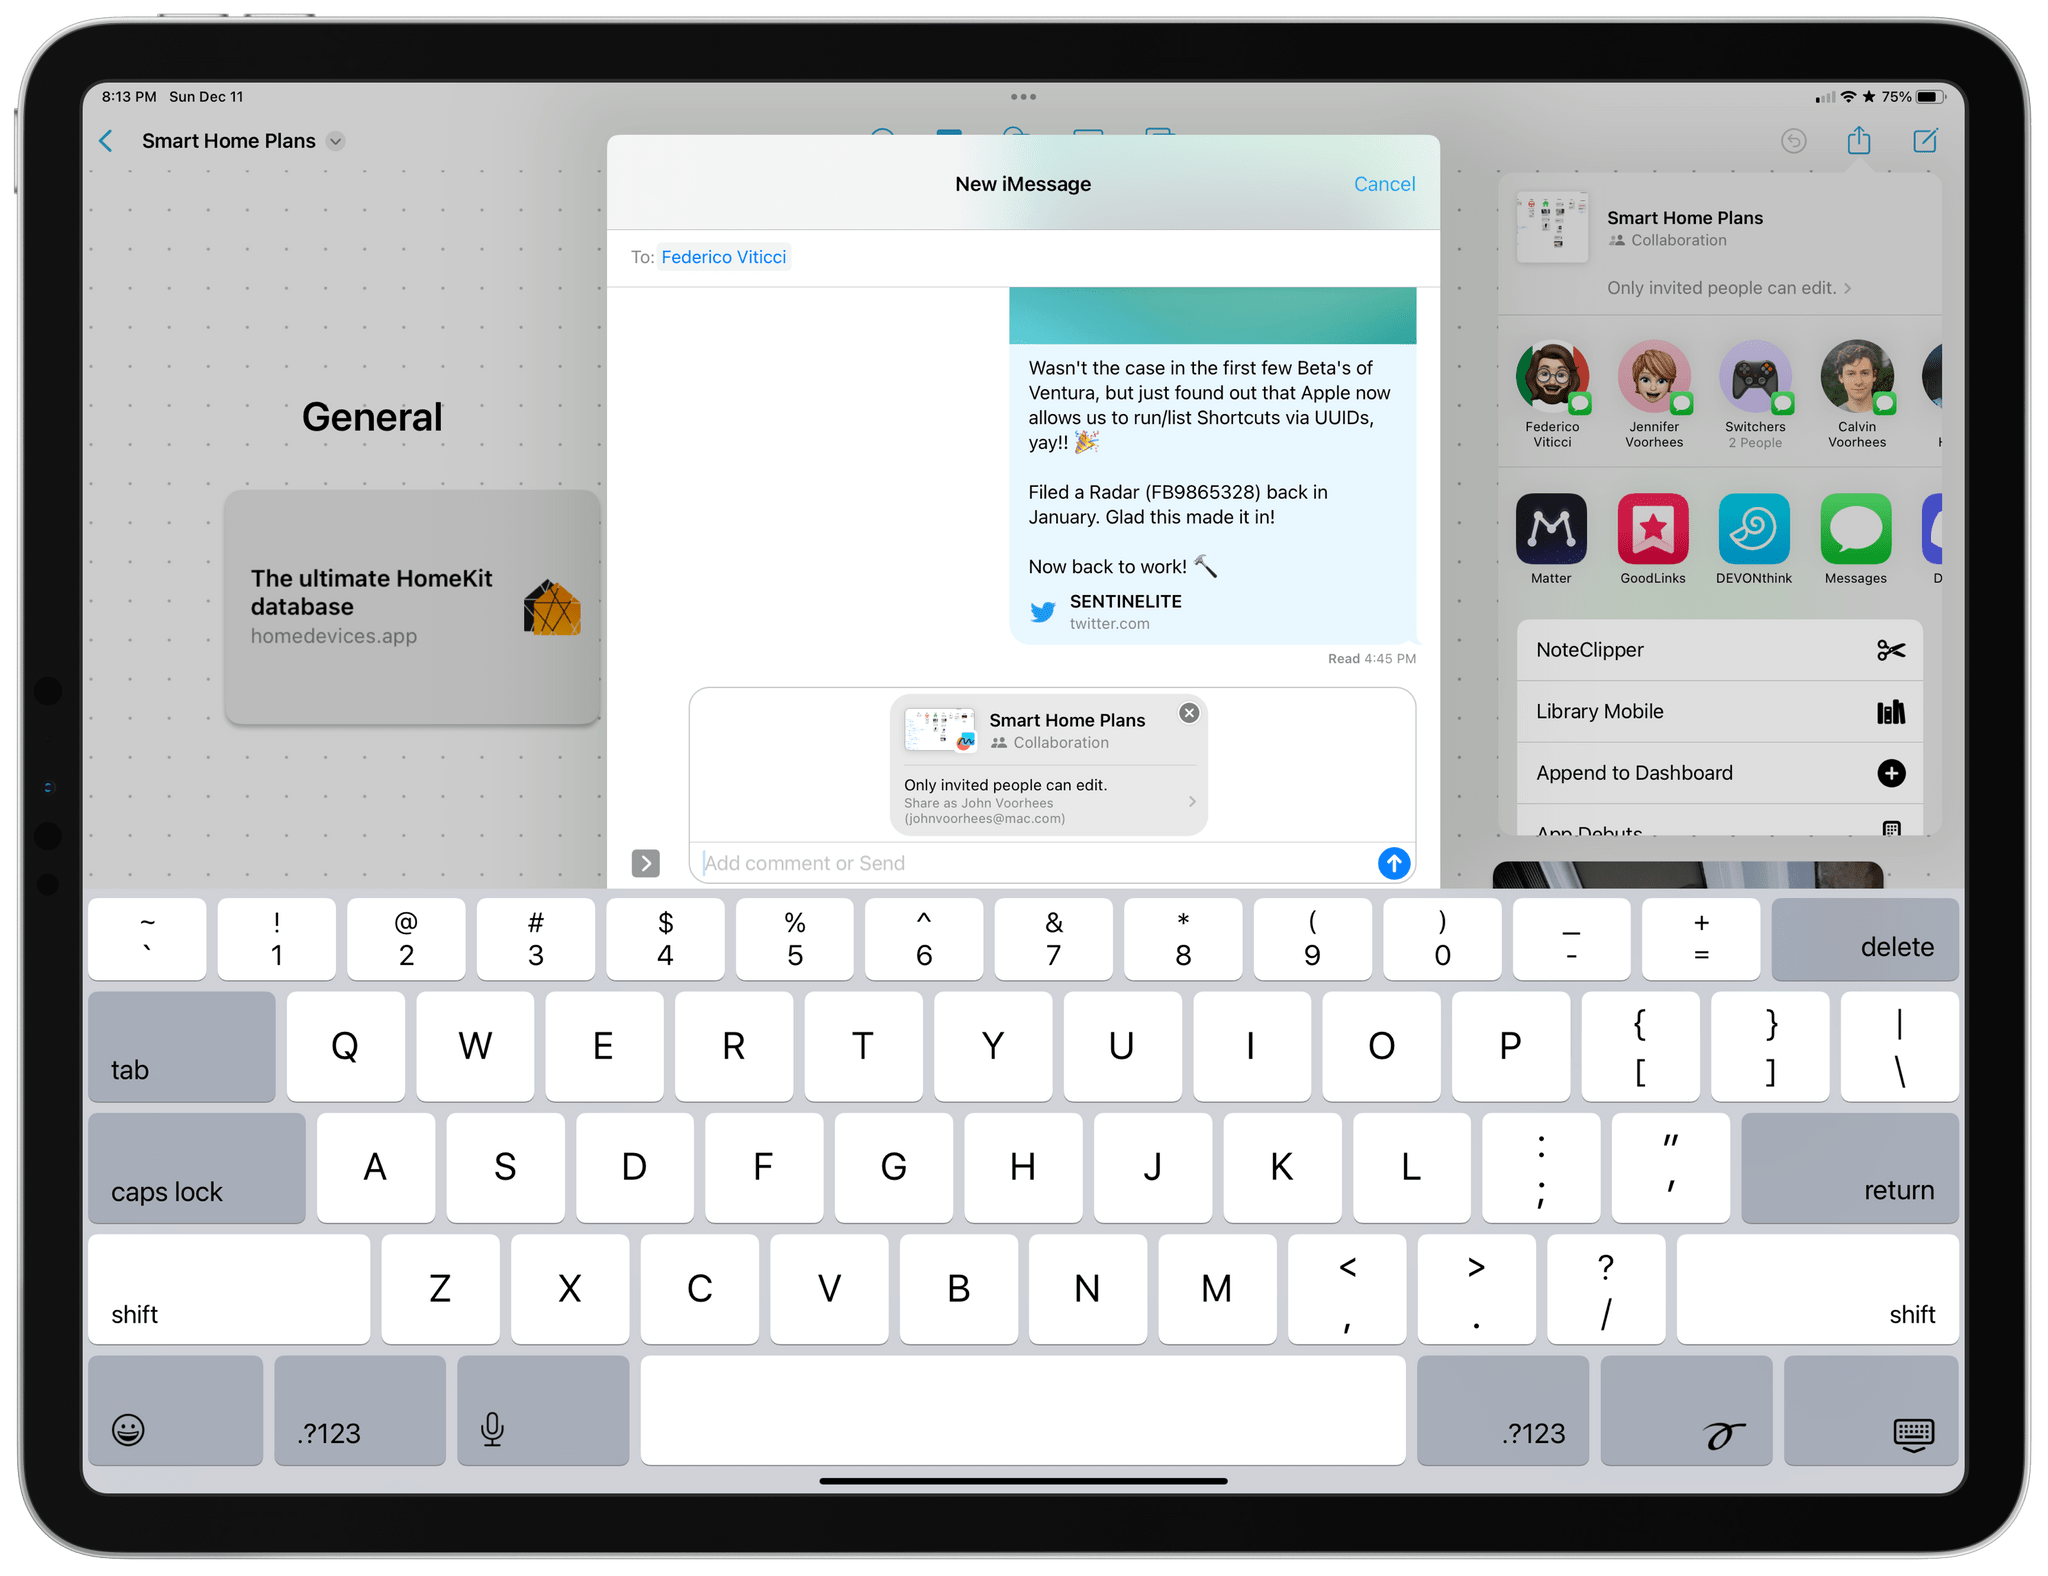 Sharing a board works like iOS 16's collaboration features do in other system apps.